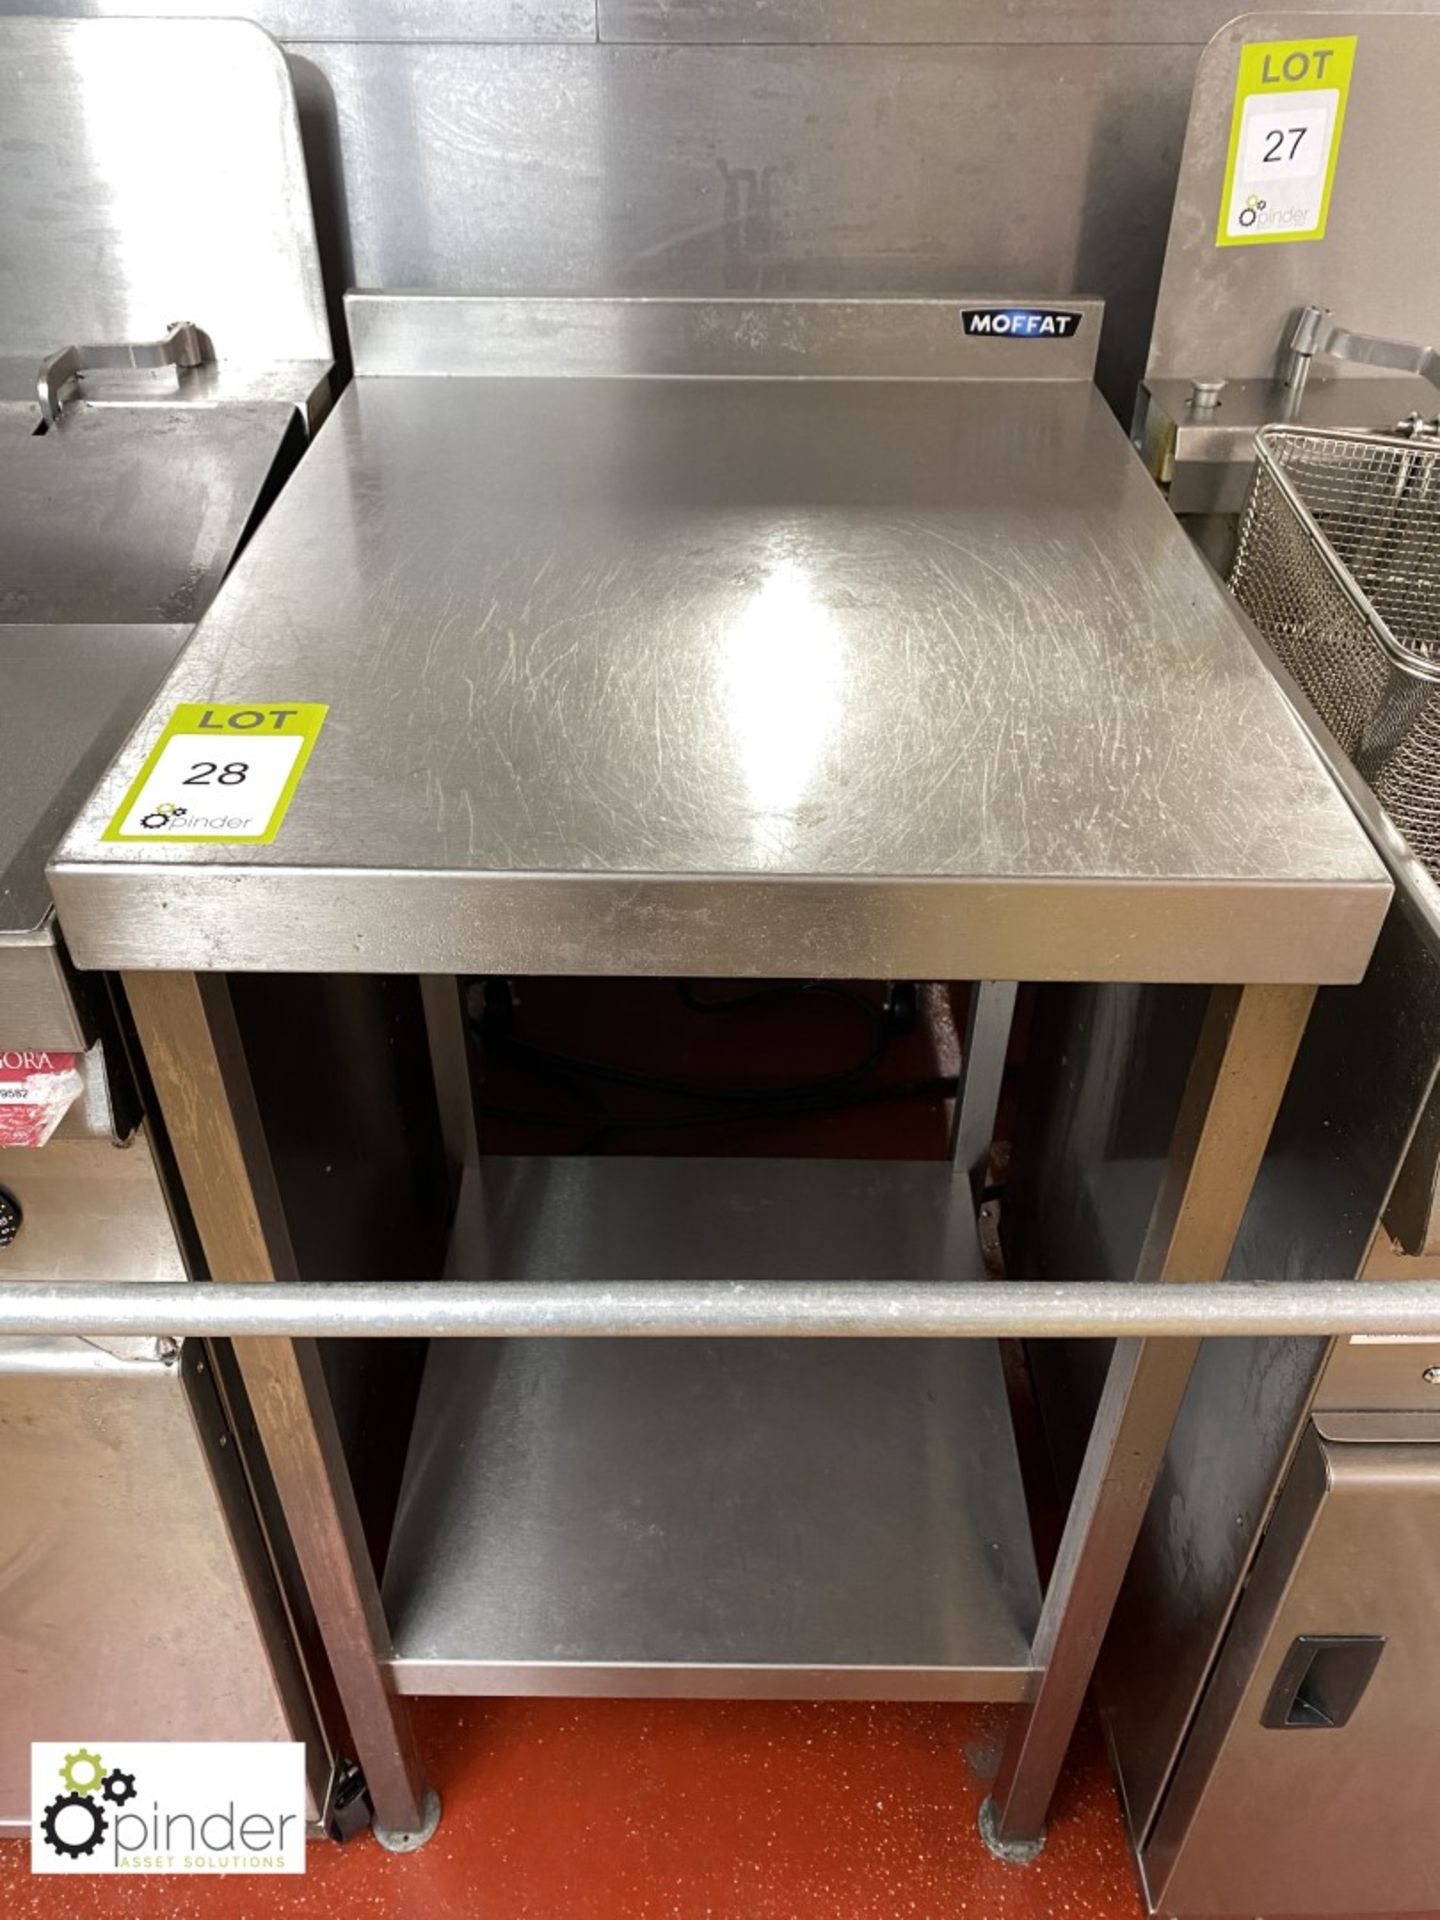 Moffat stainless steel Preparation Table, 500mm x 600mm, with rear lip and shelf under (located in